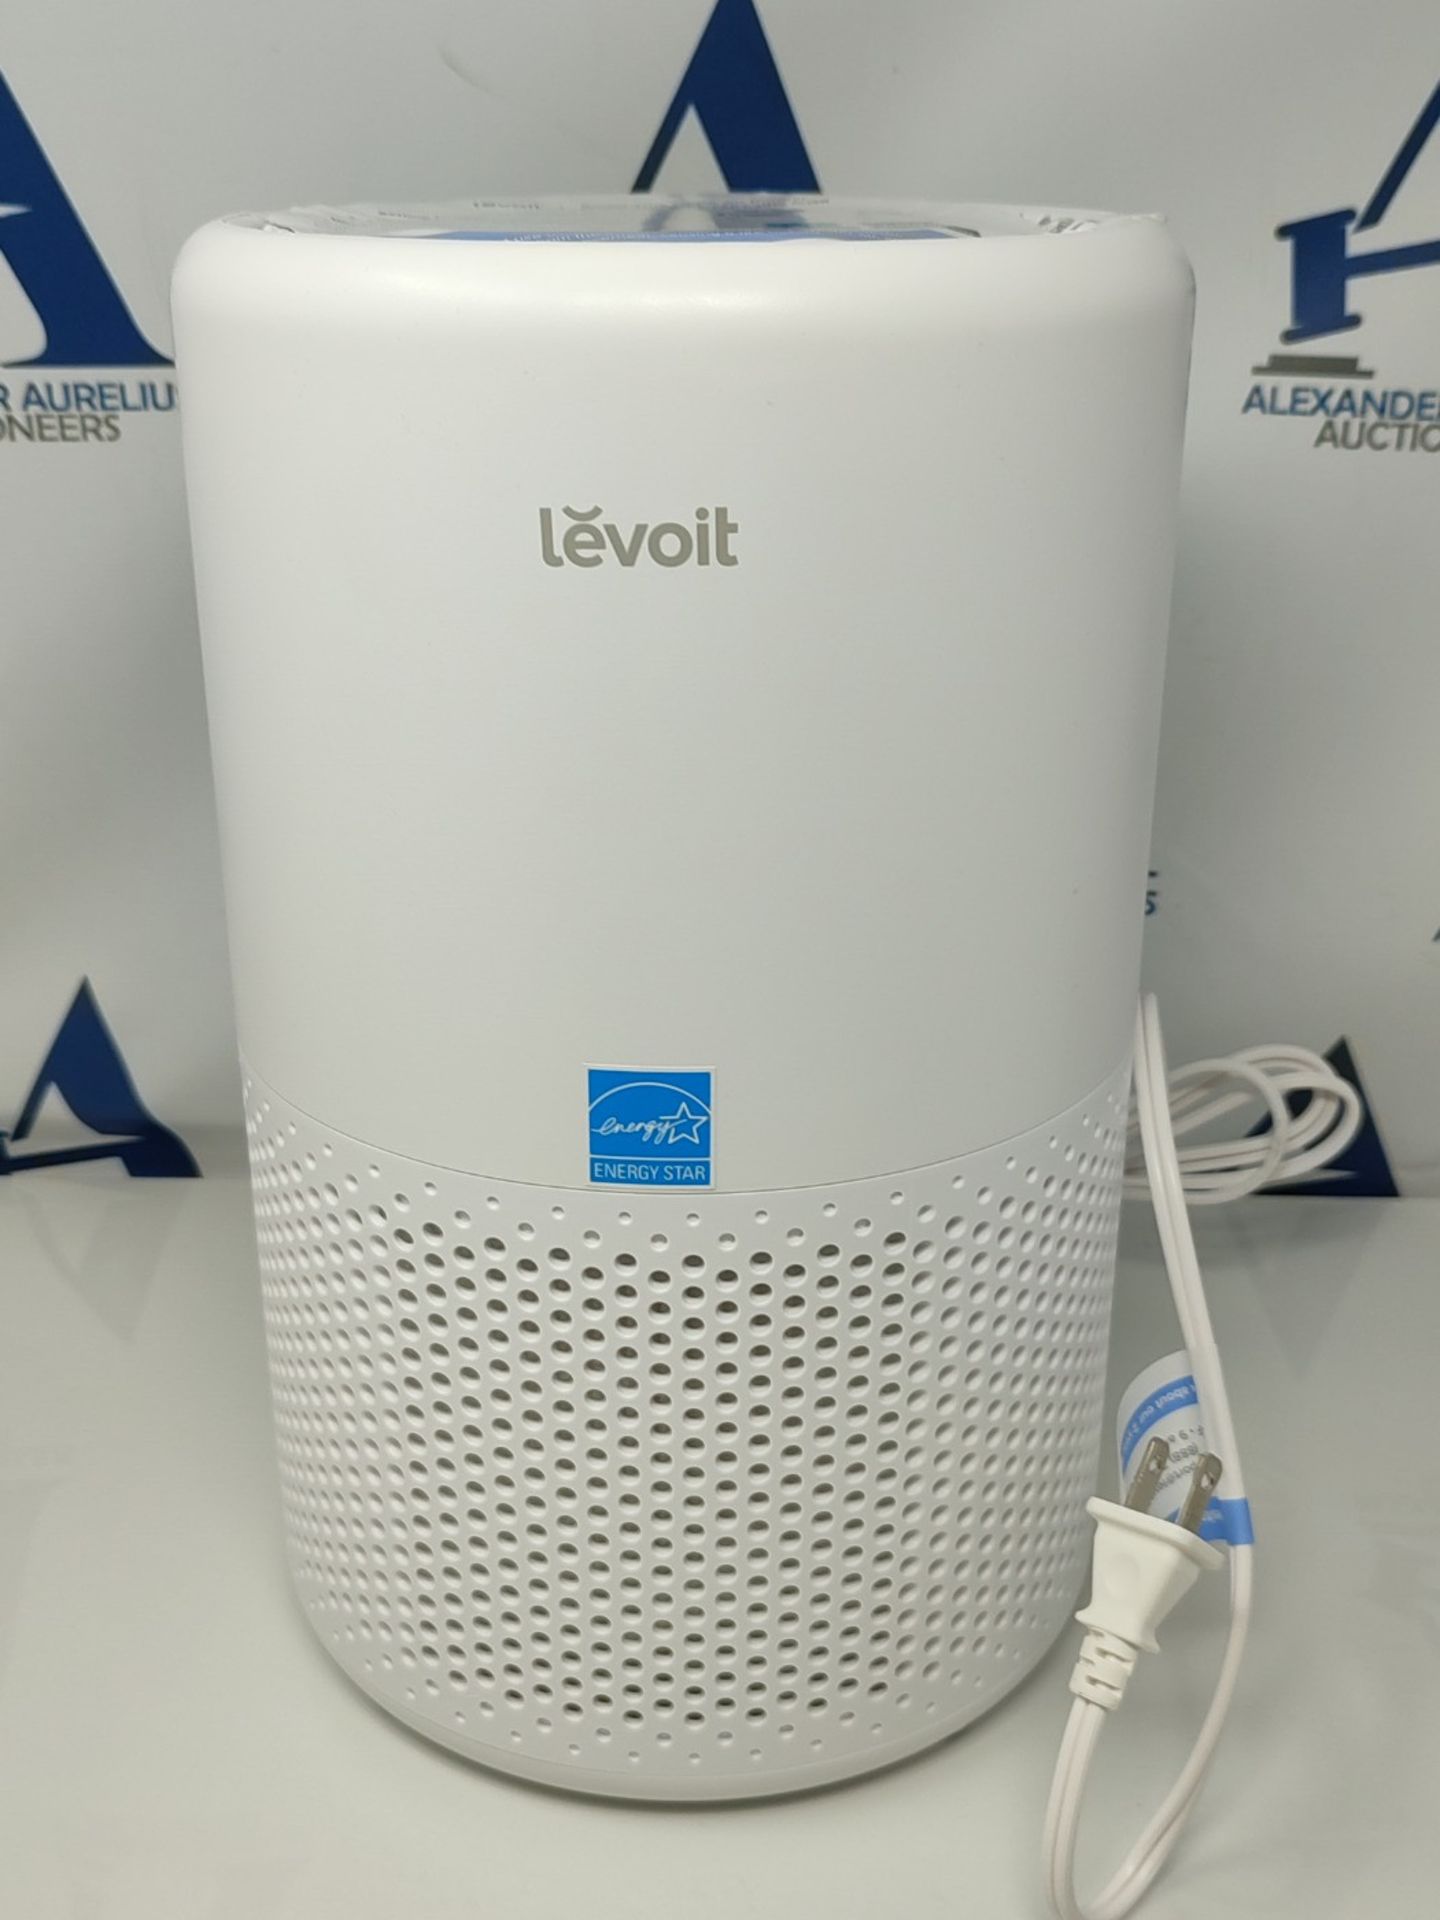 RRP £89.00 LEVOIT Smart WiFi Air Purifier for Home, Alexa Enabled H13 HEPA Filter, CADR 170m³/h, - Image 2 of 2